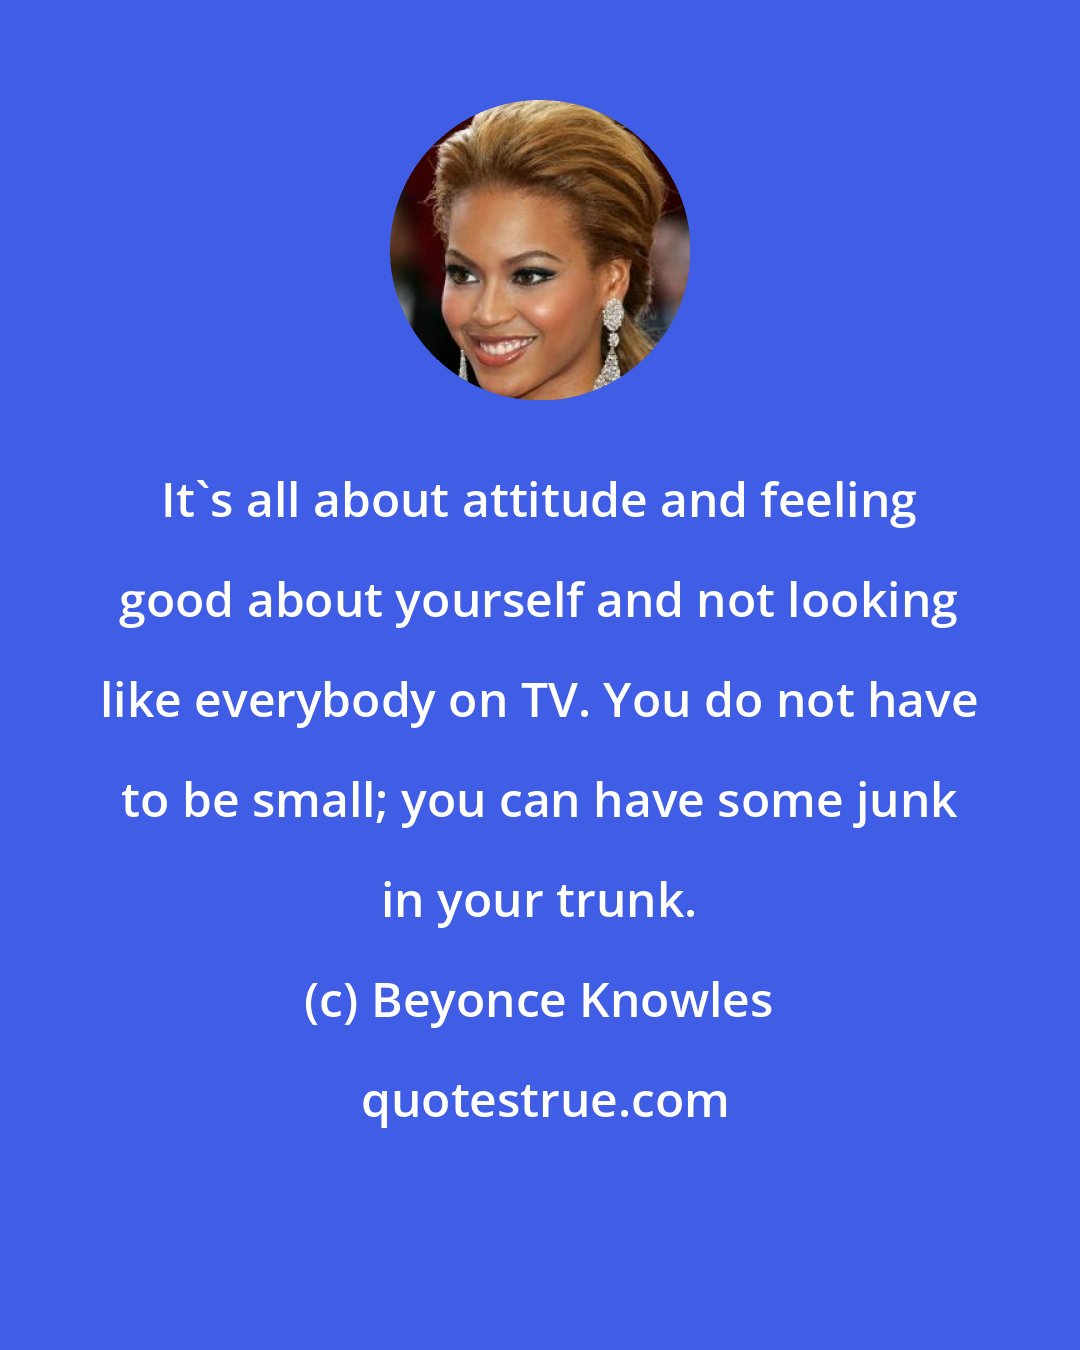 Beyonce Knowles: It's all about attitude and feeling good about yourself and not looking like everybody on TV. You do not have to be small; you can have some junk in your trunk.